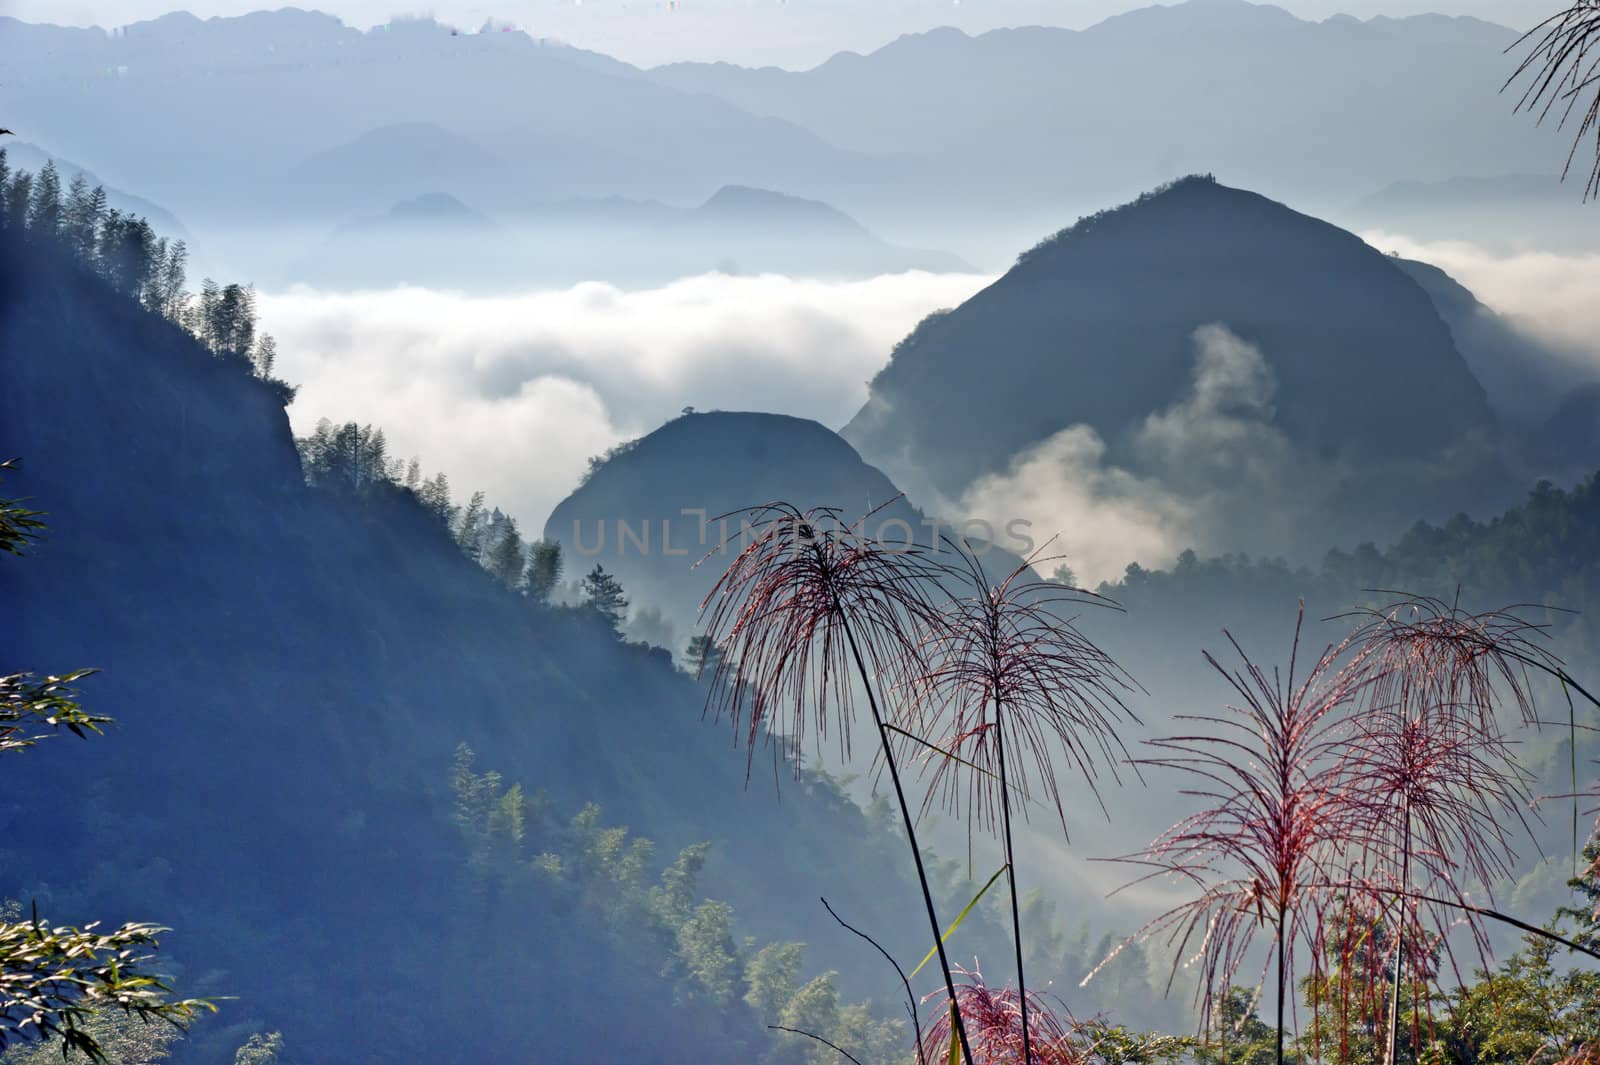 The mountains and Clouds  - beautiful landscape of ZiYuan  County Guangxi, China by xfdly5